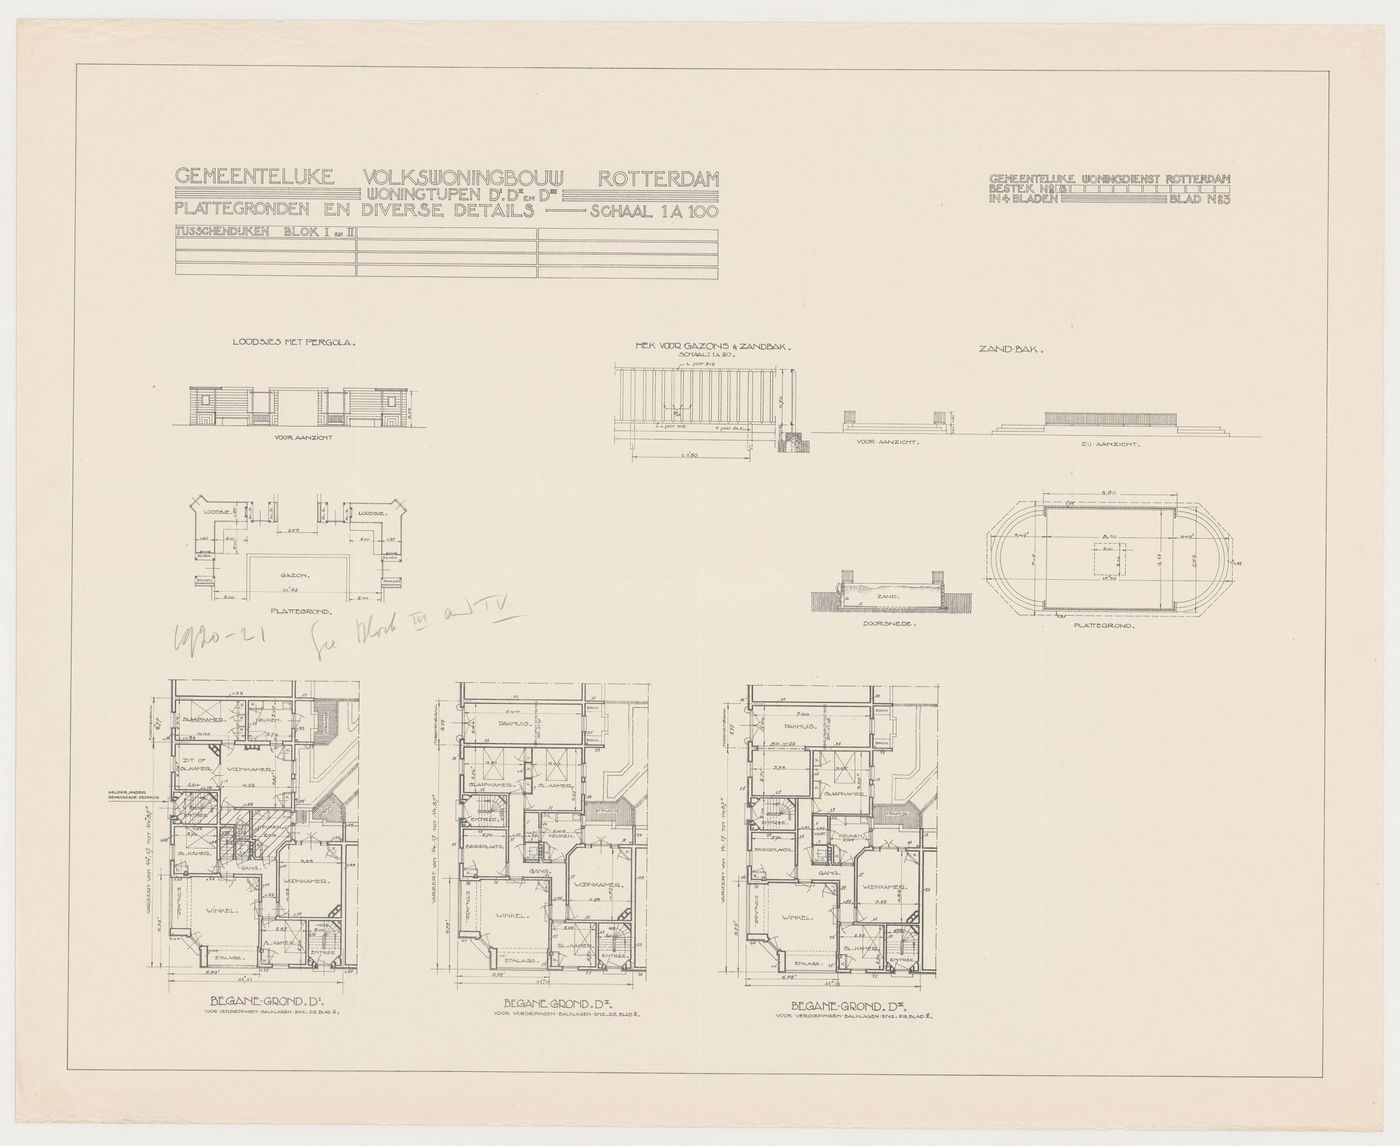 Ground floor plans for type D1 - D3 housing units, elevation and plan for sheds and plans, sections and elevation for a sandbox for Blocks 1 and 2, Tusschendijken Housing Estate, Rotterdam, Netherlands